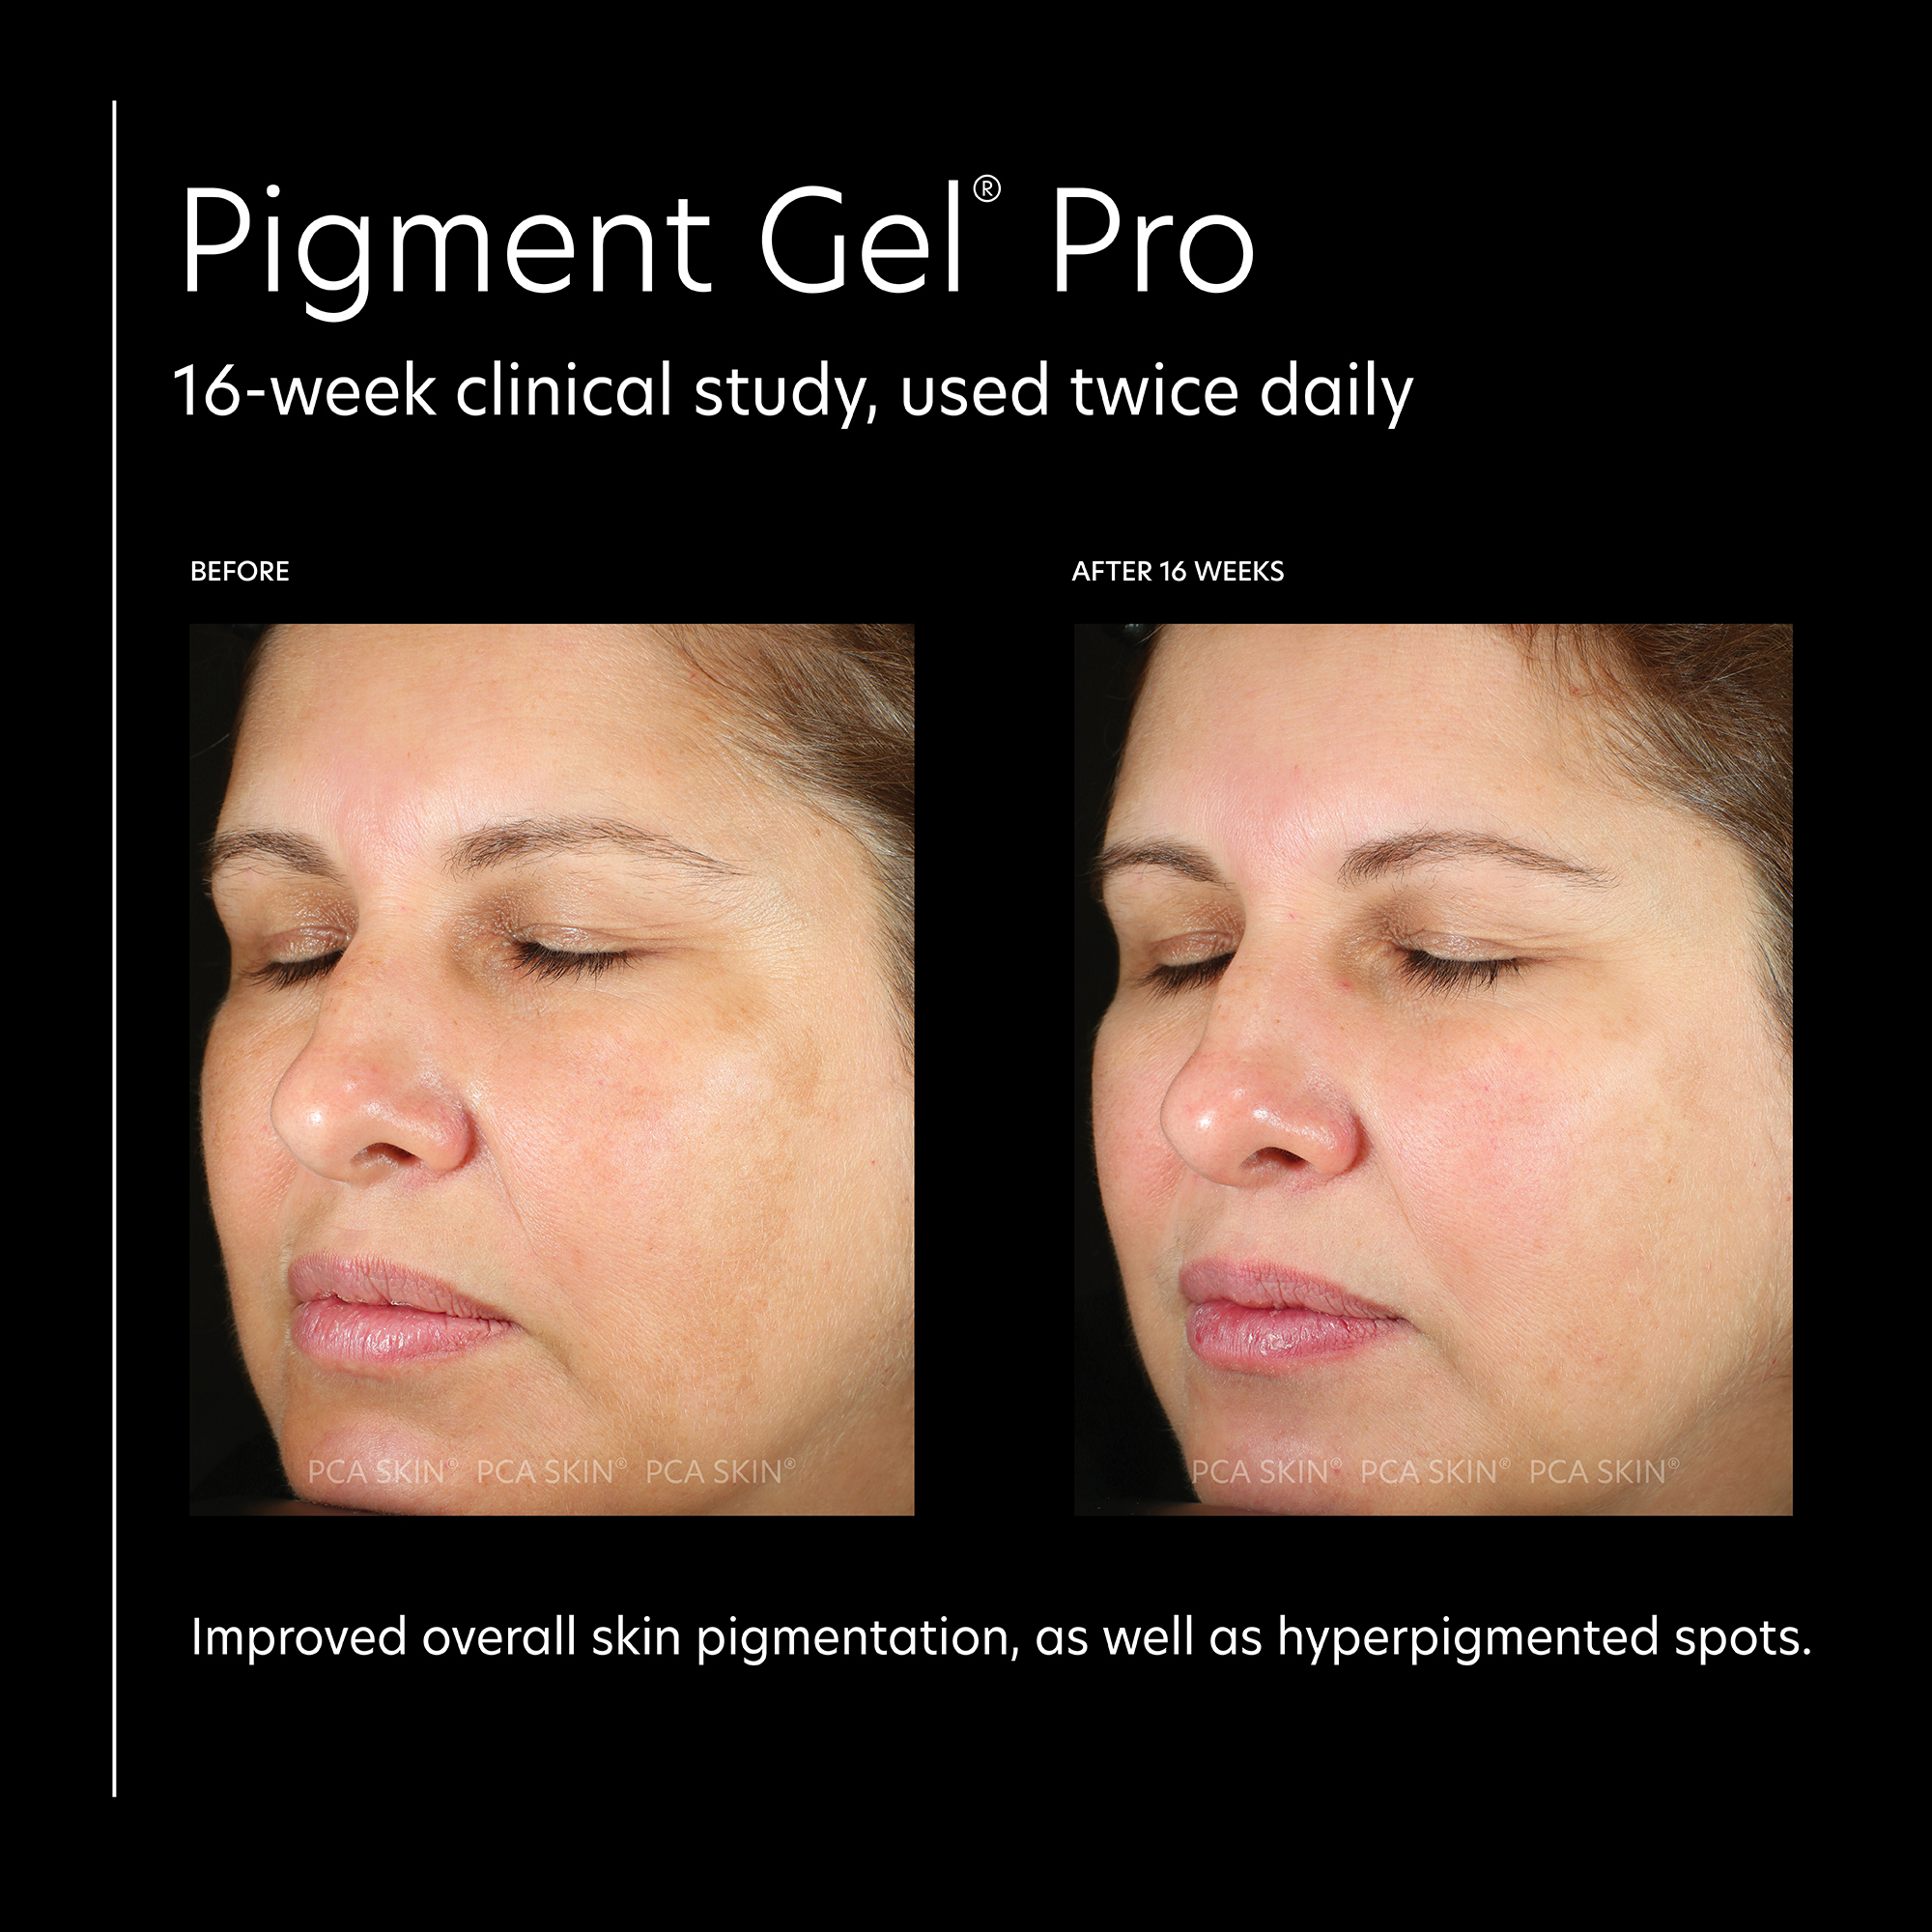 Image 1, Before and after, 16 week clinical study. Improved overall skin pigmentation, as well as hyperpigmentation spots. Image 2, helps improve visible discoloration while helping to protect against the appearance of new dark spots. Image 3, our most advanced dark spot serum corrective serum, dermatologically tested hydroquinone-free serum that targets dark spots and discoloration. Image 4, the new gold standard in pigment correction. Image 5, visibly improve stubborn dark spots and other forms of discoloration, before and after